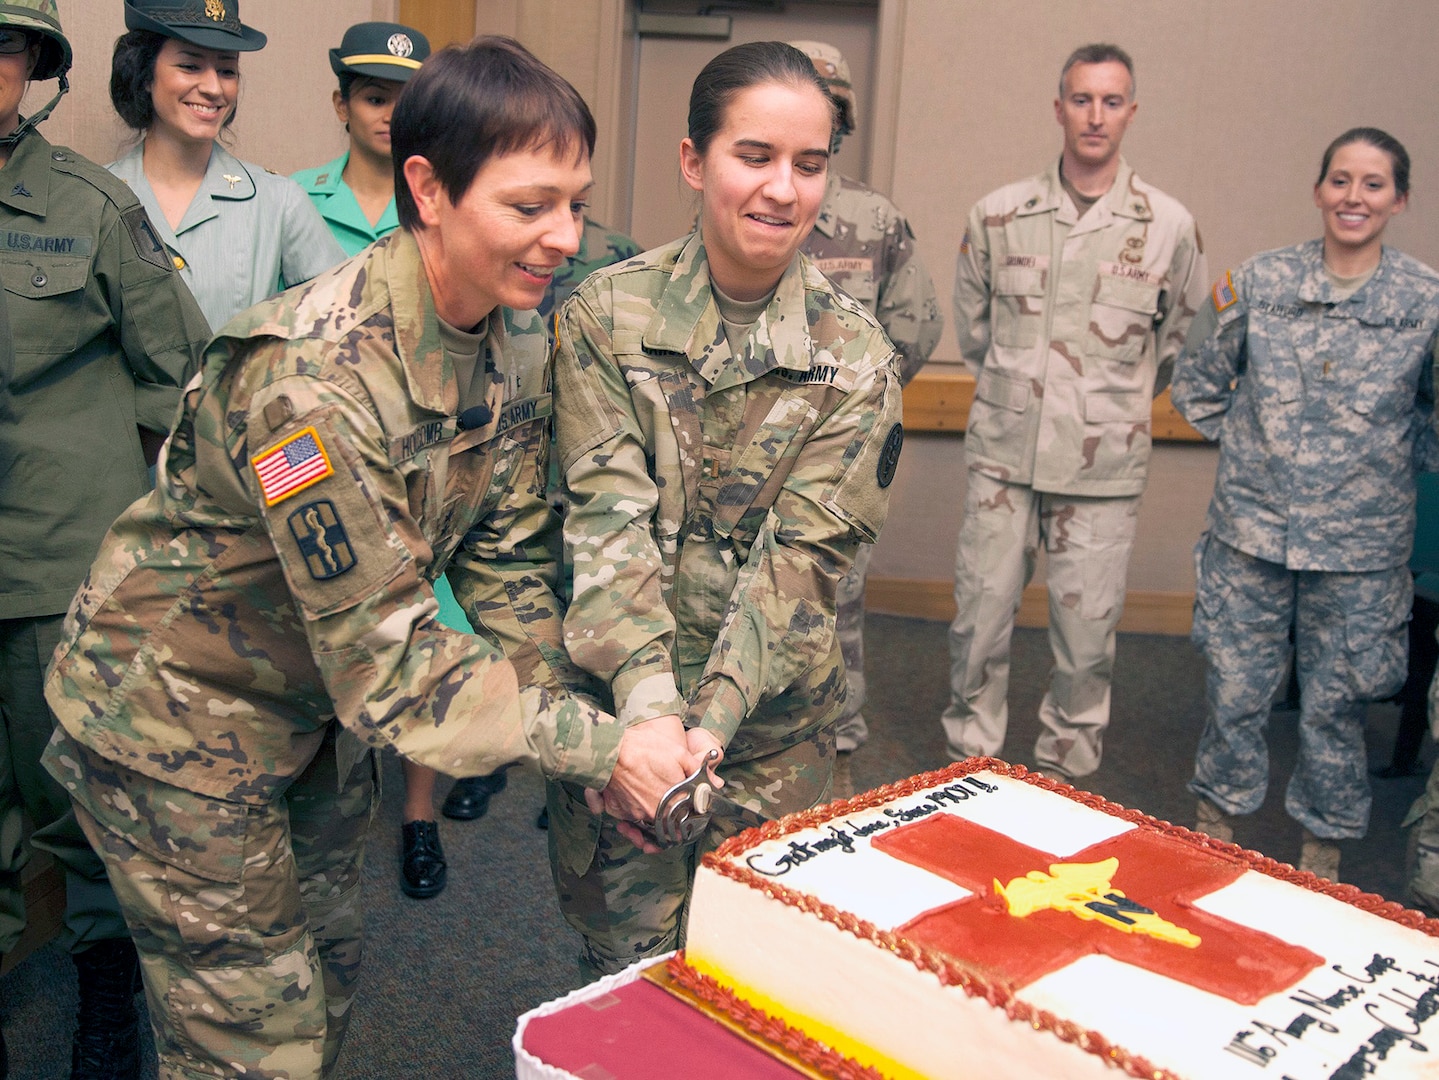 Maj. Gen. Barbara Holcomb, chief of the U.S. Army Nurse Corps, and the youngest Army nurse in attendance, Army 2nd Lt. Jennifer Garcia, cut the cake to celebrate the 116th birthday of the Army Nurse Corps Feb. 2 during a ceremony in the Brooke Army Medical Center auditorium at Joint Base San Antonio-Fort Sam Houston.